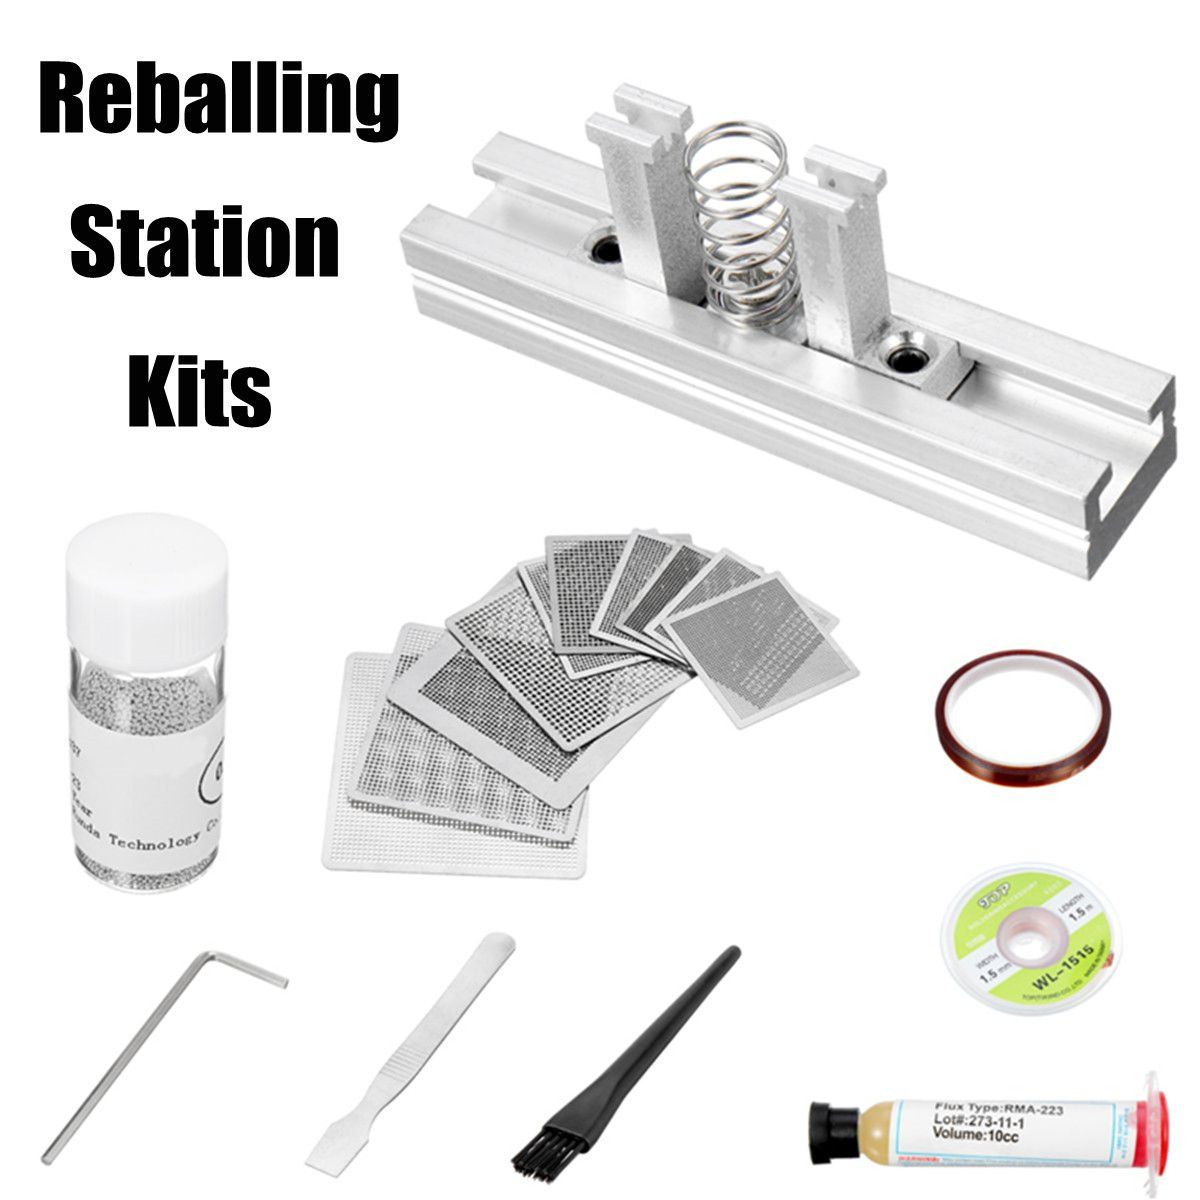 BGA-Reballing-Station-with-10pcs-Steel-Template-Stencils-and-06mm-Solder-Ball-Kits-1420318